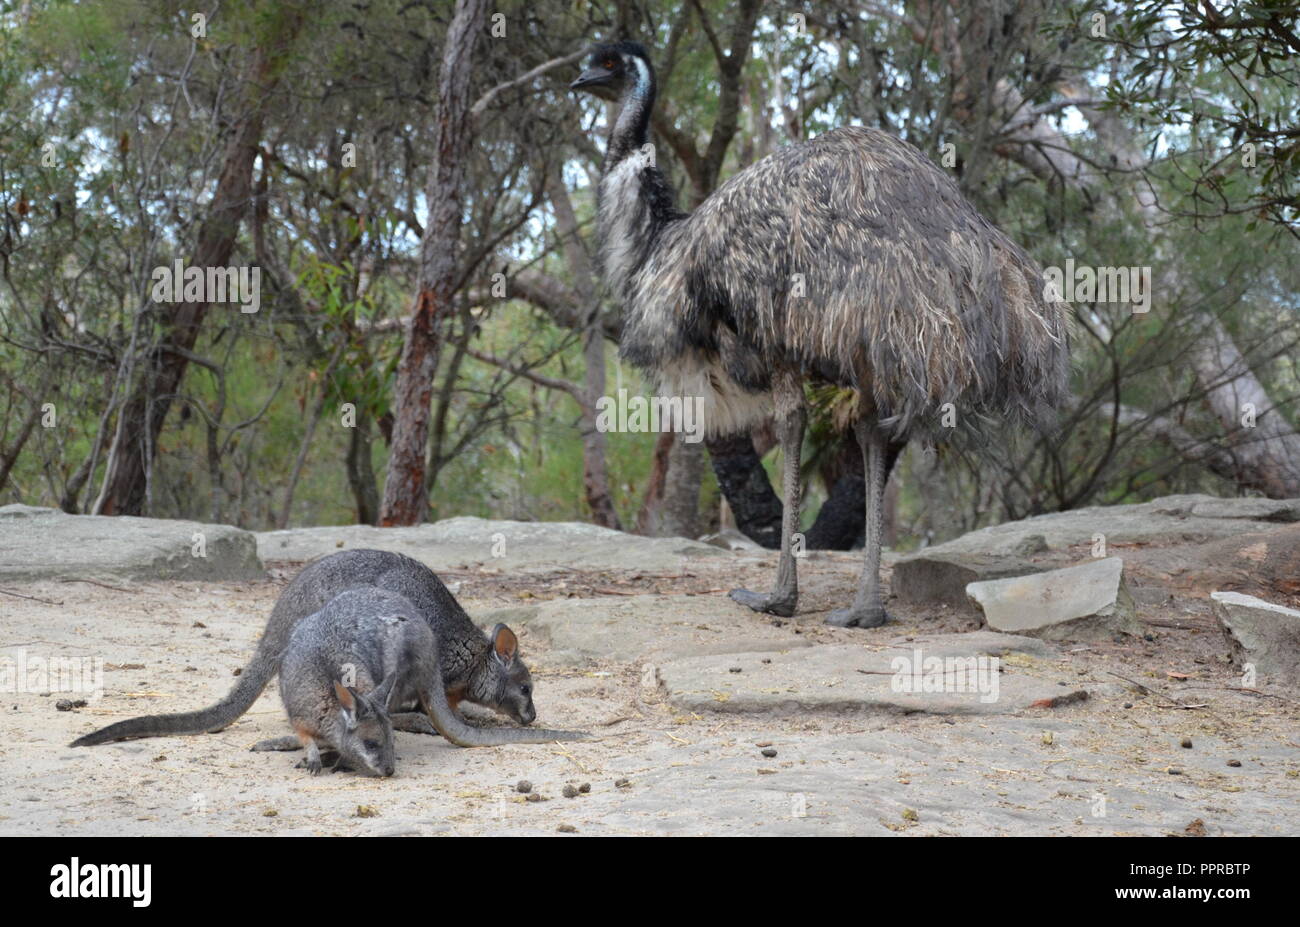 Rock-wallabies eating grass. Emu, Australia's largest bird in the background. Stock Photo